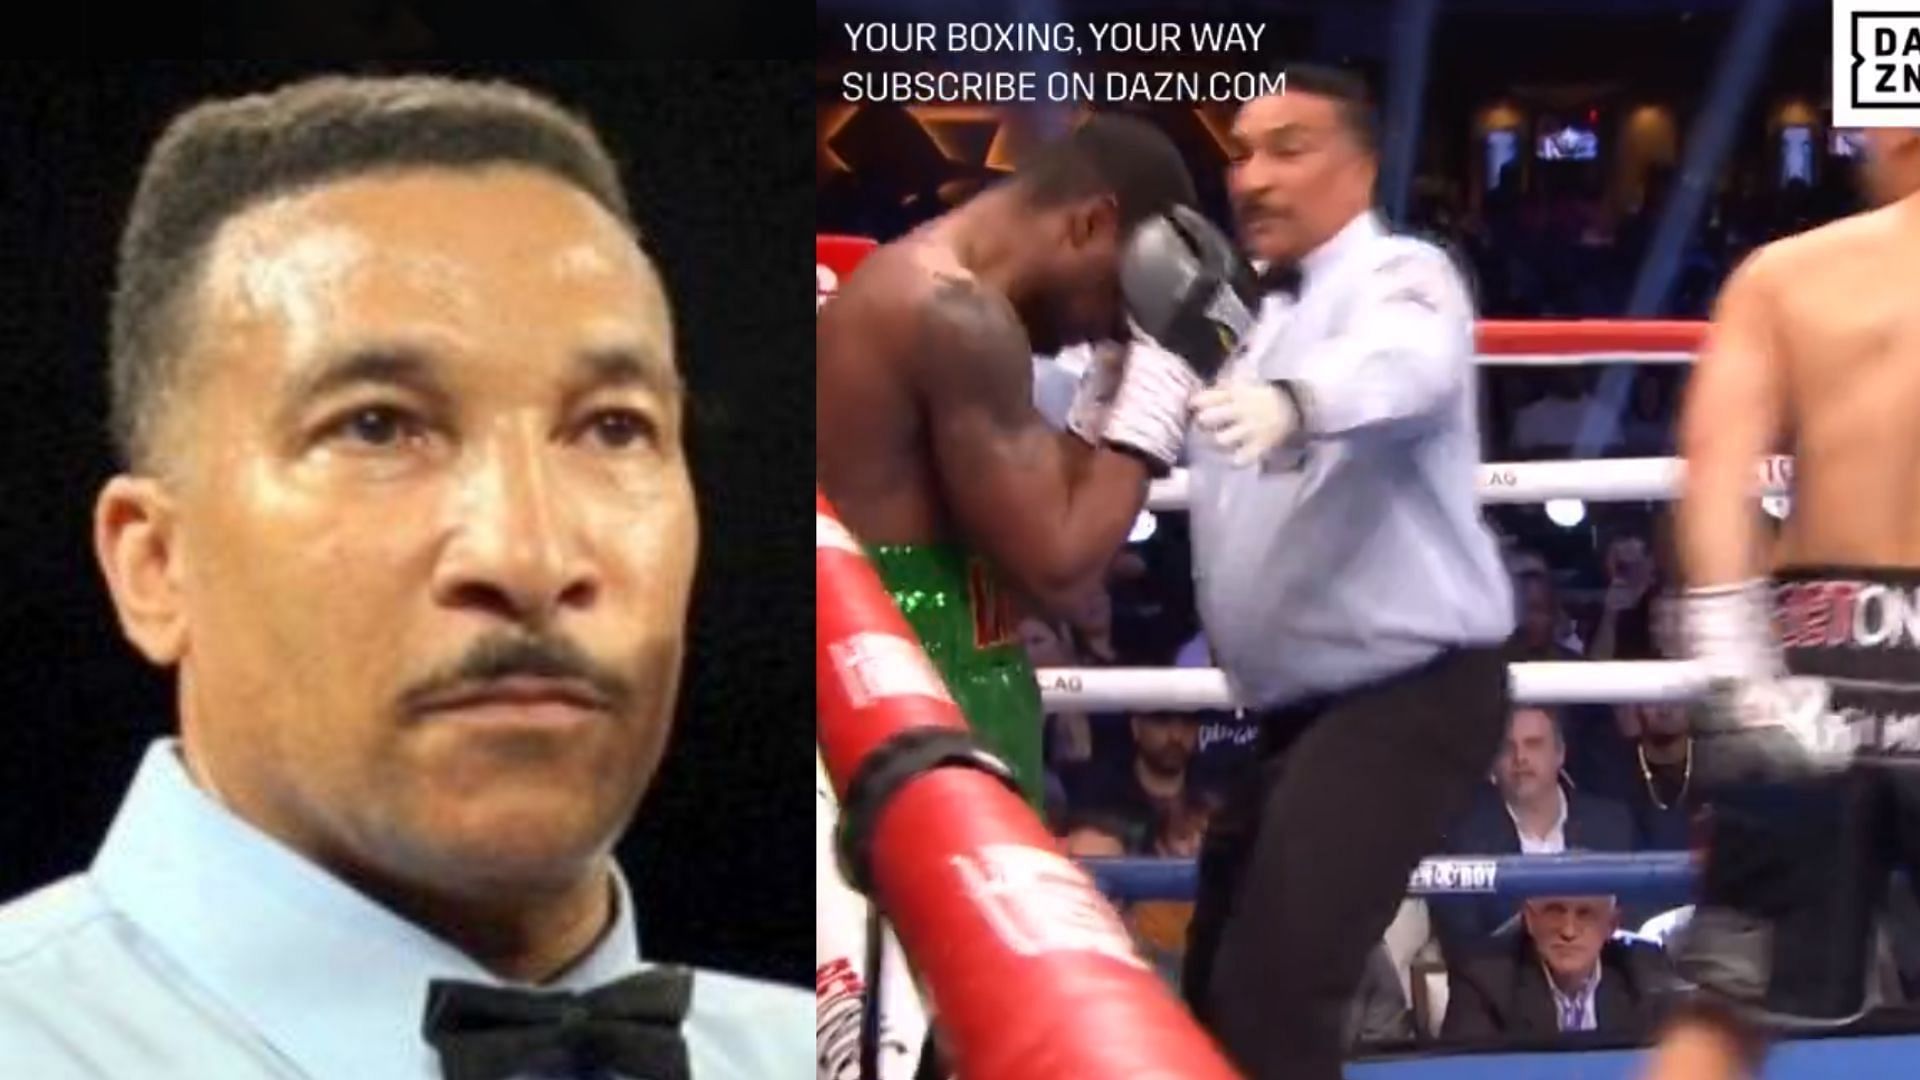 Referee Tony Weeks (left) releases statement following controversial stoppage between Vergil Ortiz Jr. and Fredrick Lawson [Images courtesy of @daznboxing on X]